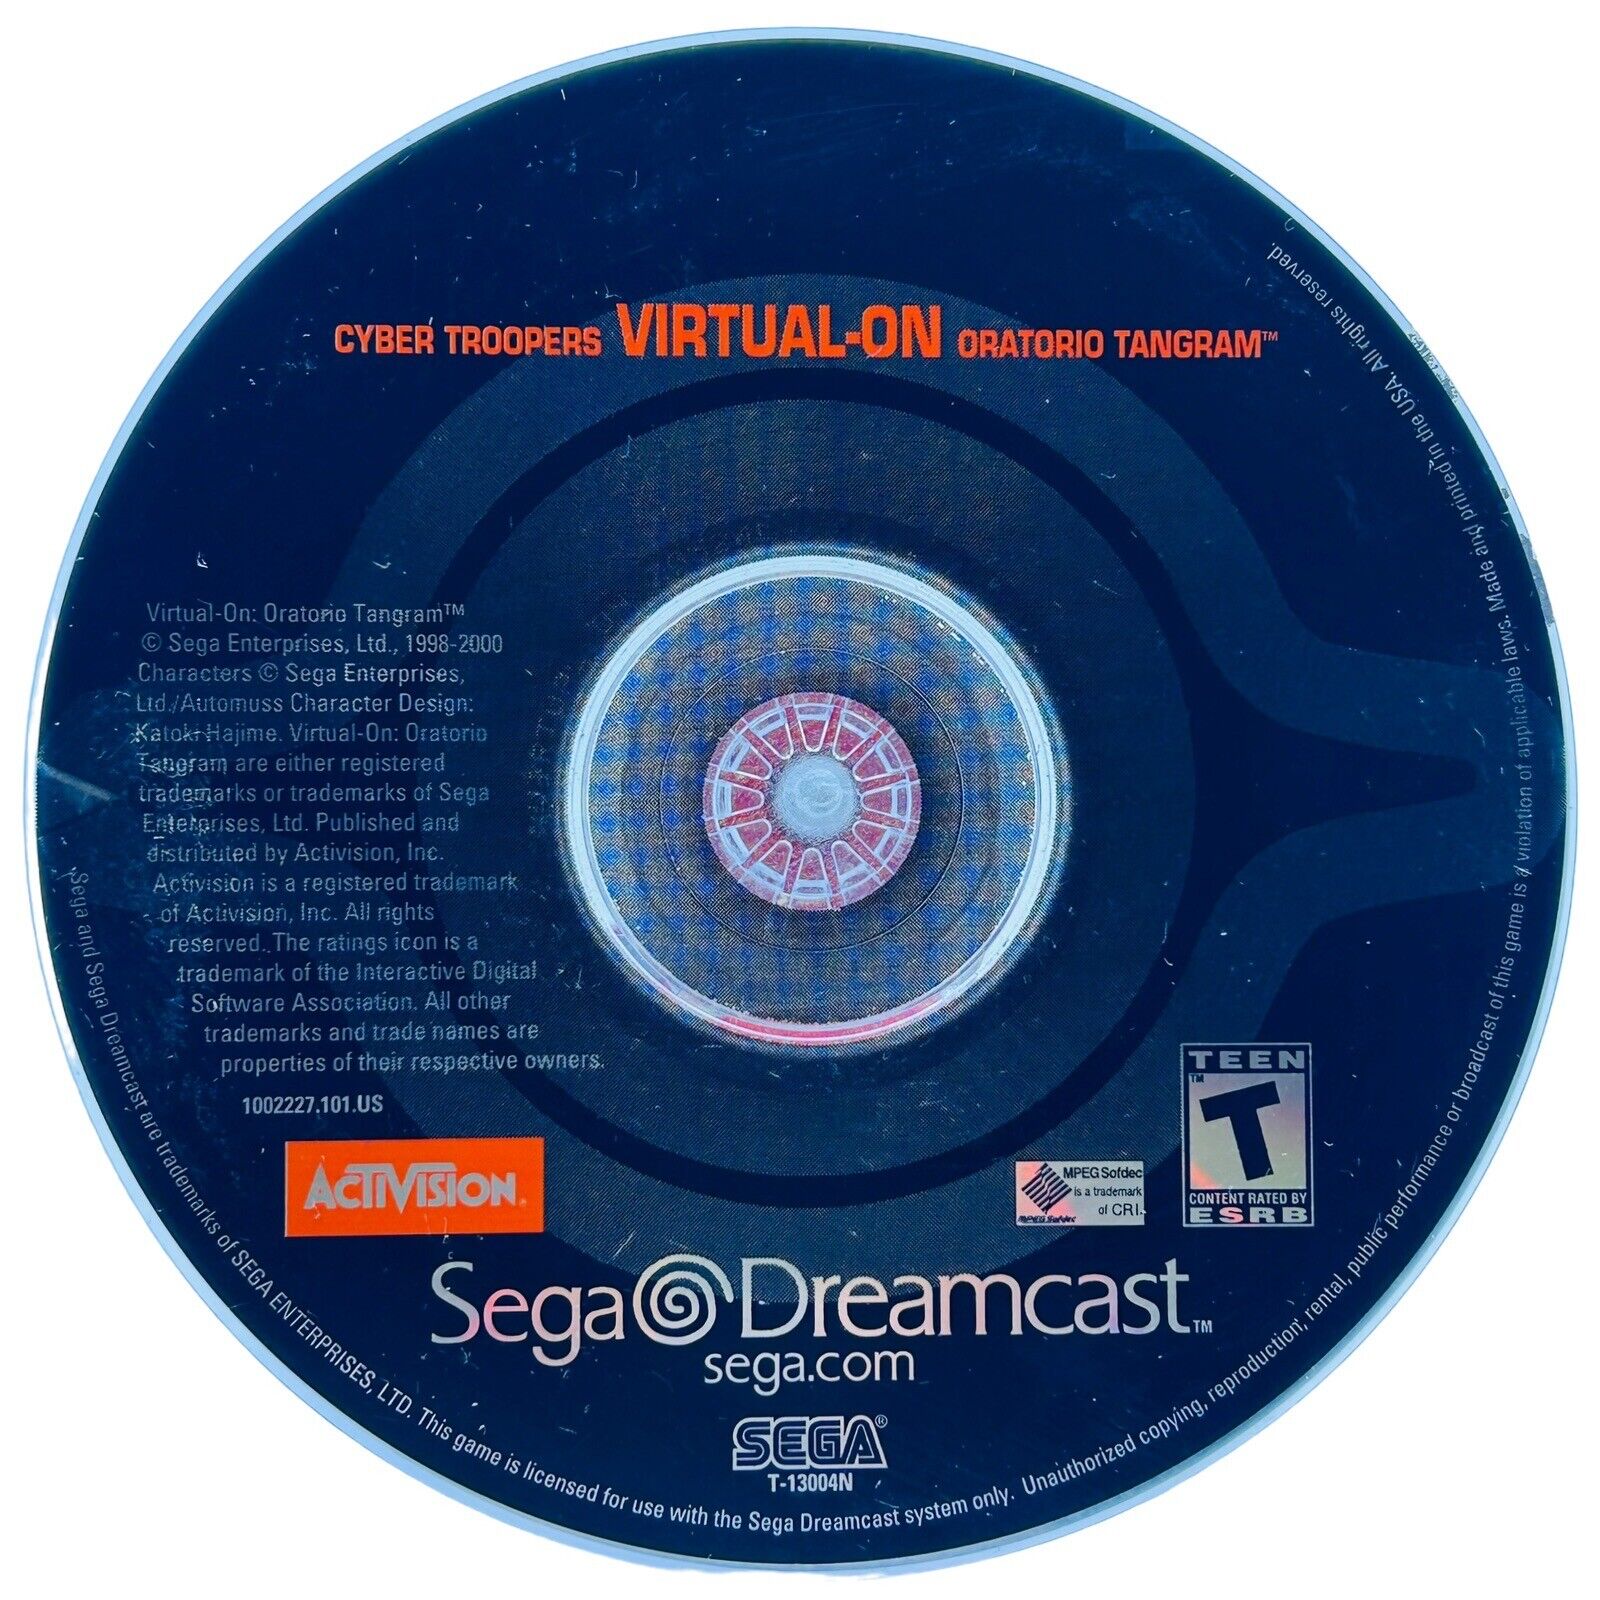 Cyber Troopers VIRTUAL-ON Oratorio Tangram (Sega Dreamcast) Tested Game Disc